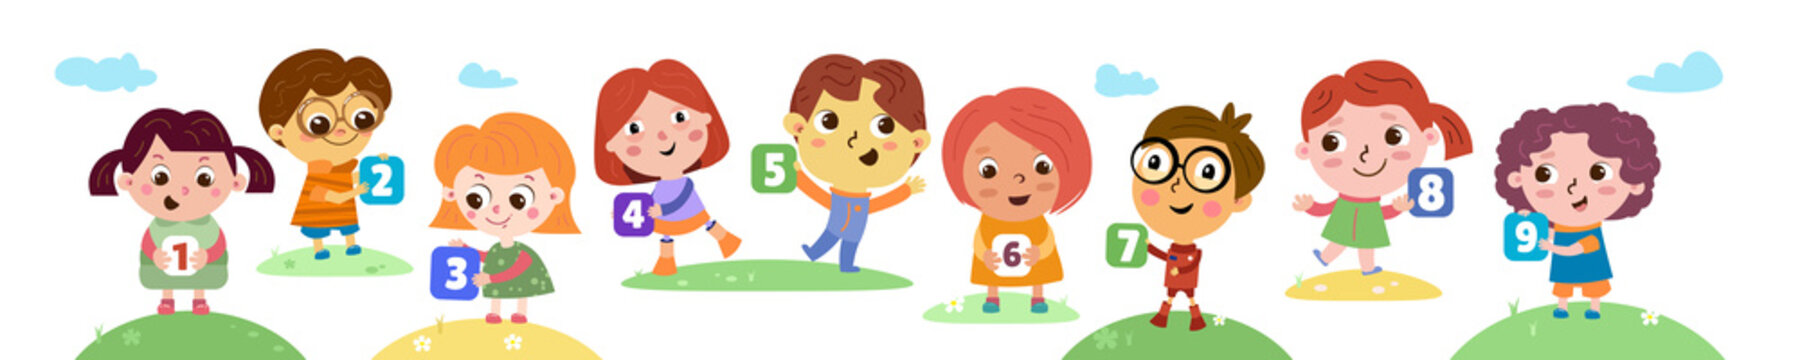 Set of children with numbers from 1 to 9. Cartoon style character for design. Vector illustrations, full color.